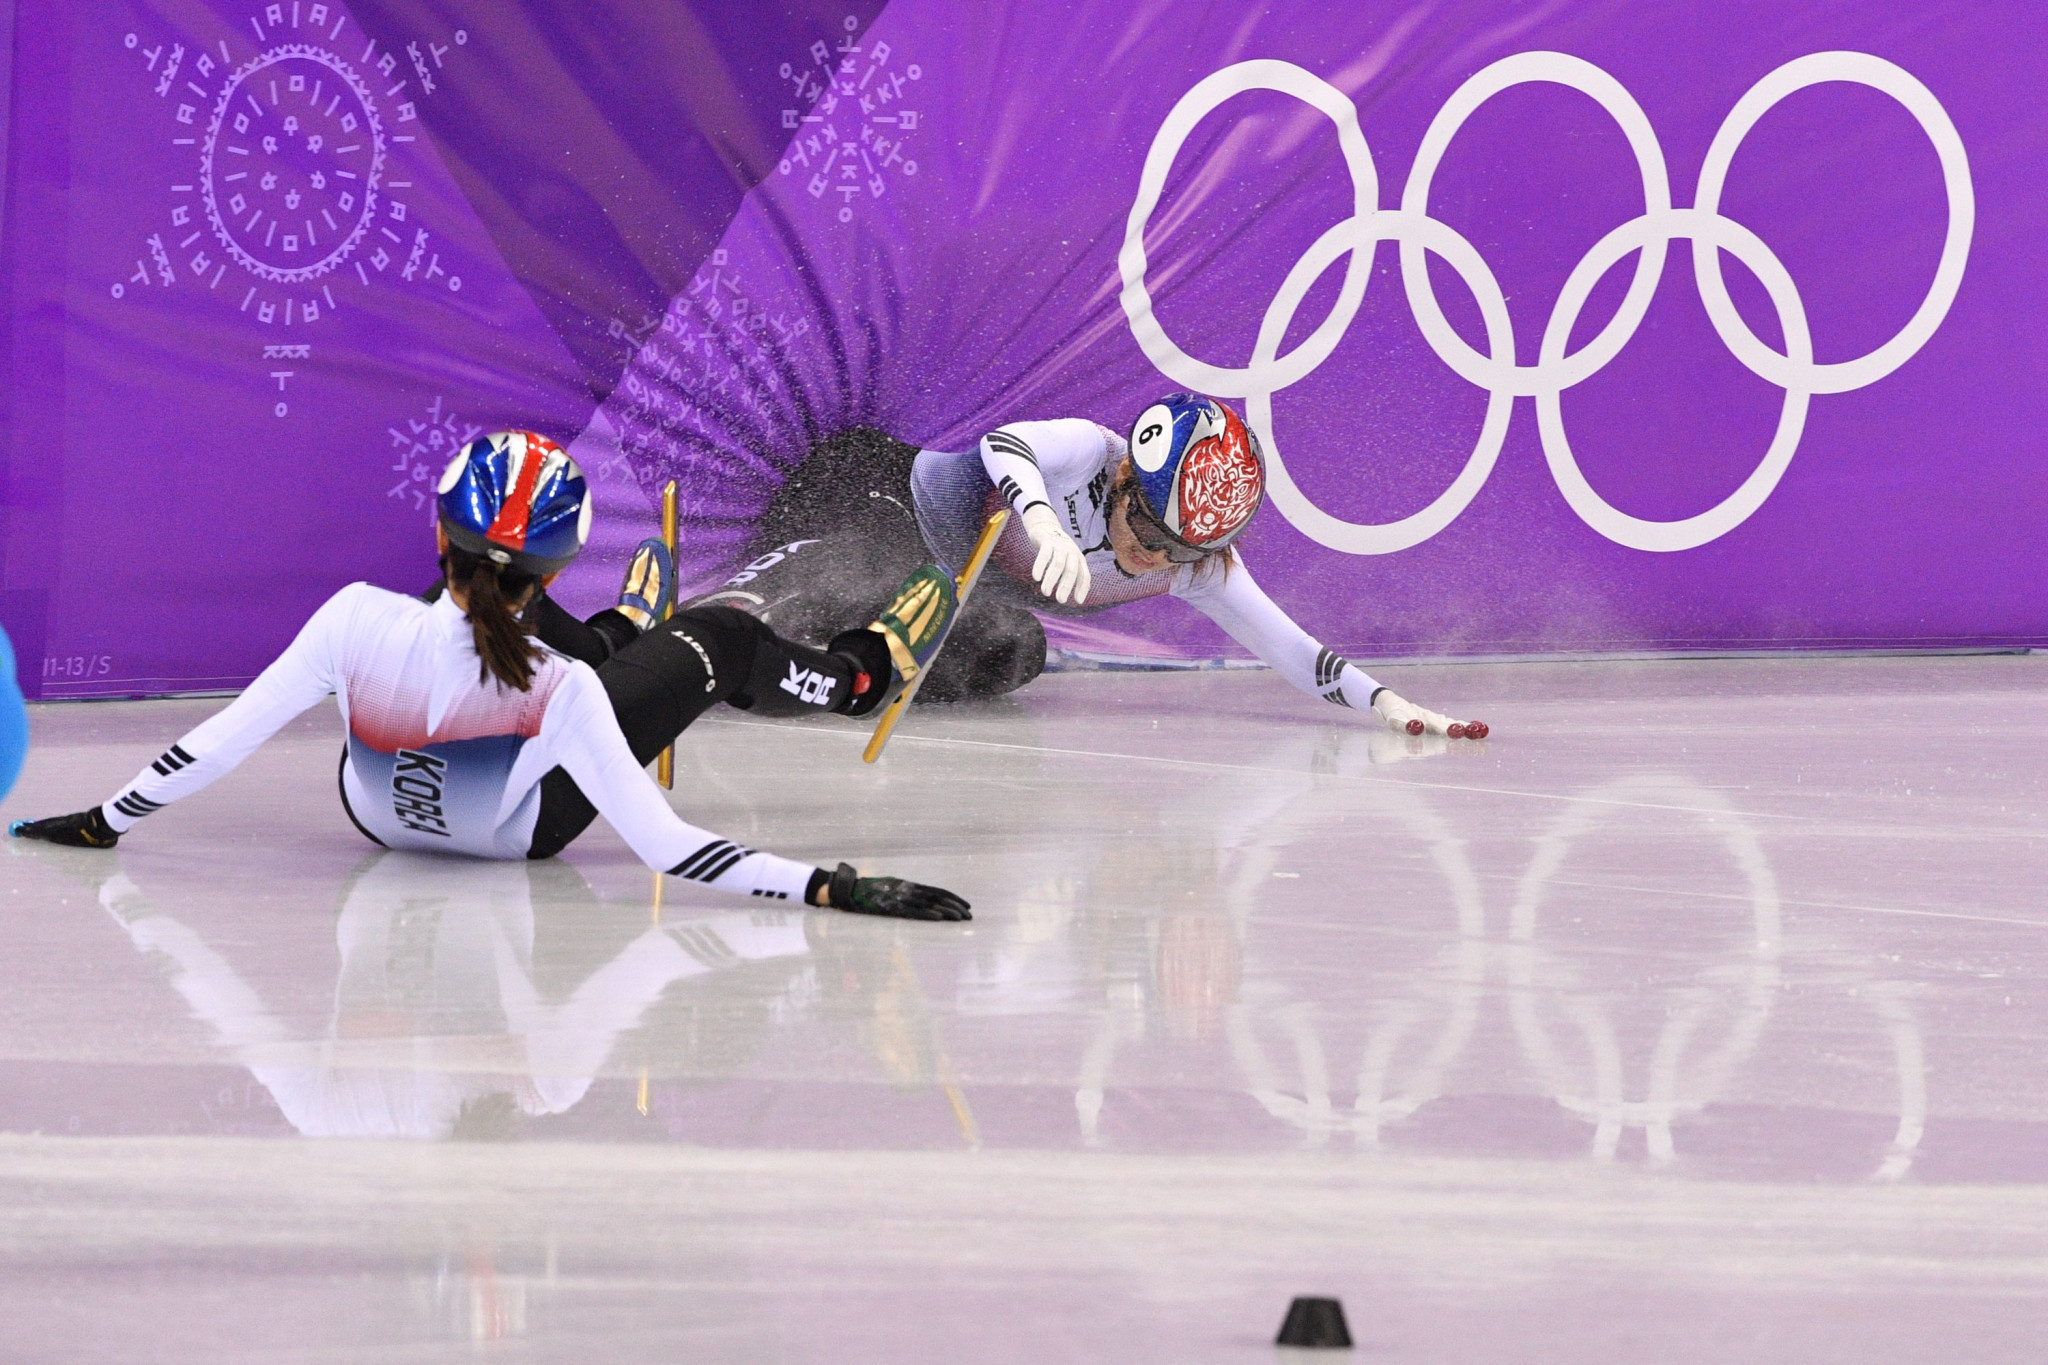 Shim Suk-hee and Choi Min-jeong crashed out of the women's 1,000m final at Pyeongchang 2018 ©Getty Images